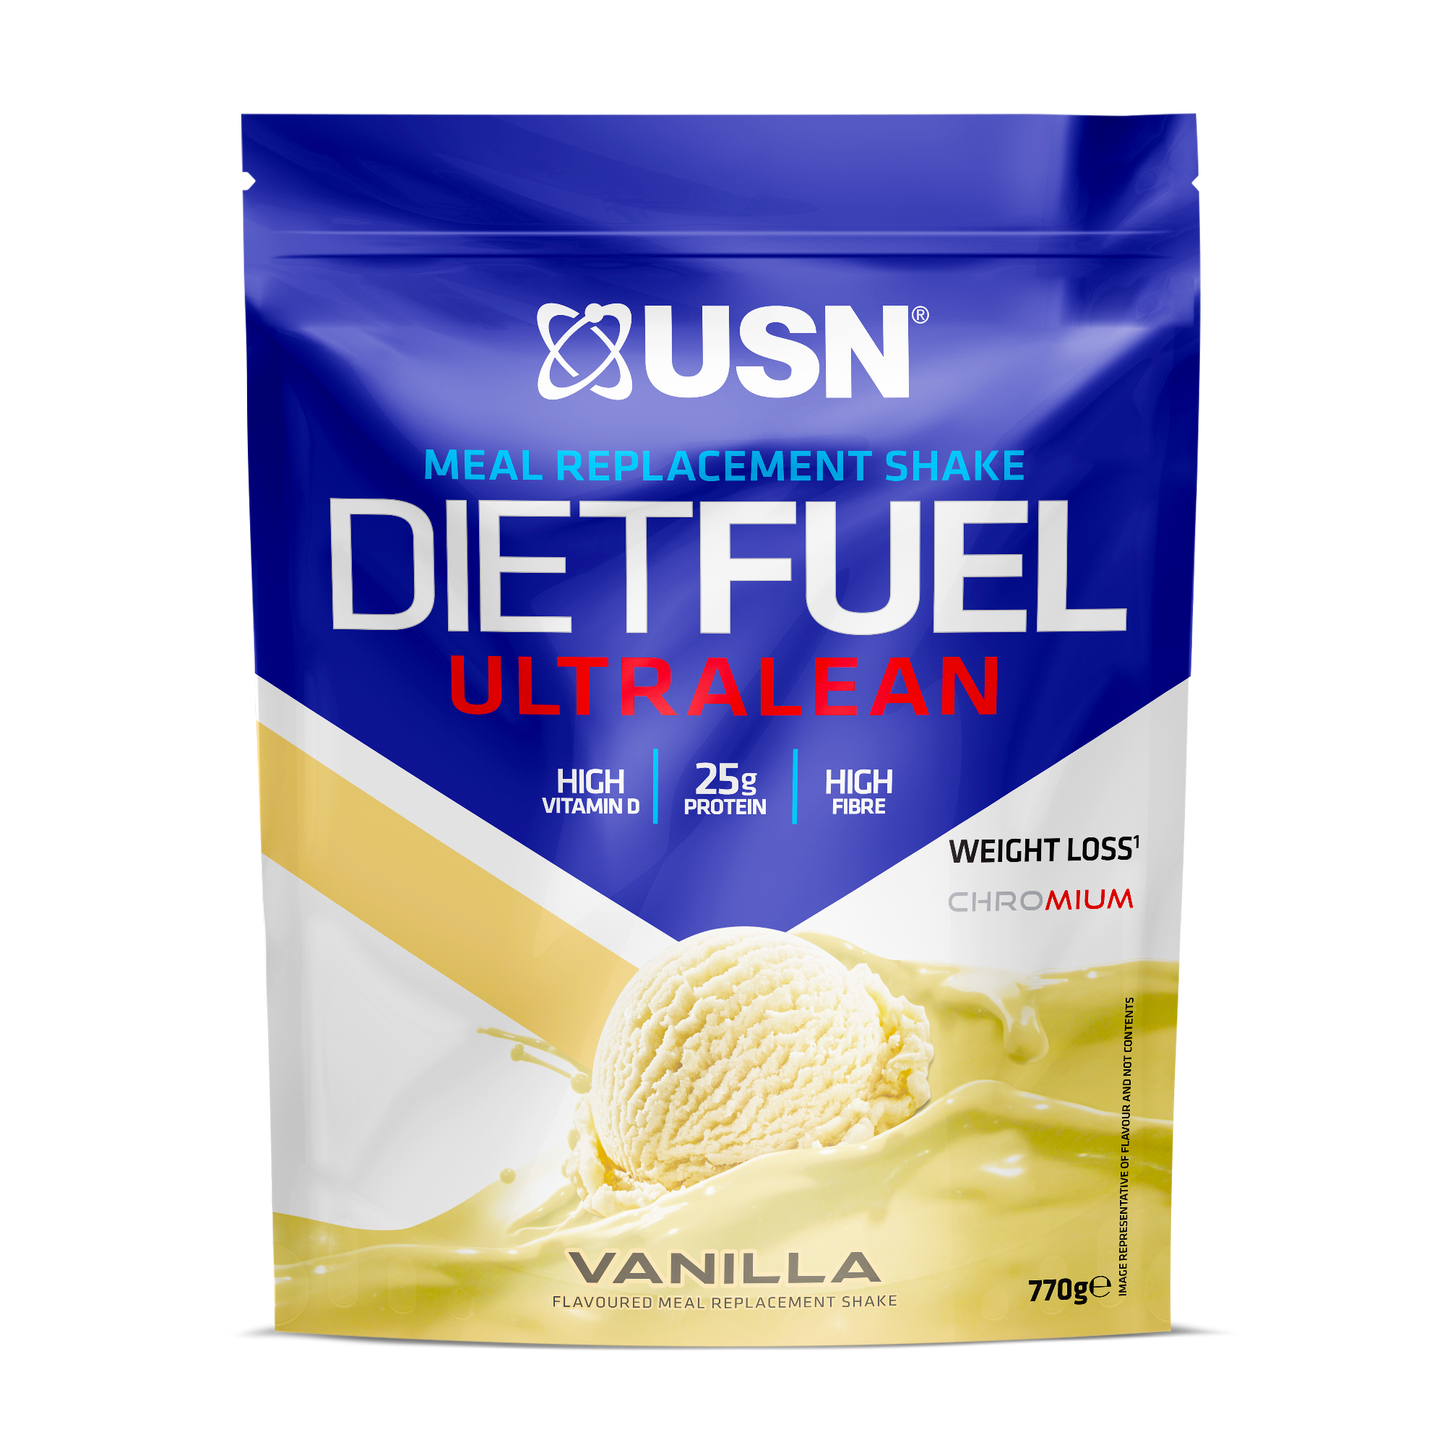 Diet Fuel Ultralean Meal Replacement